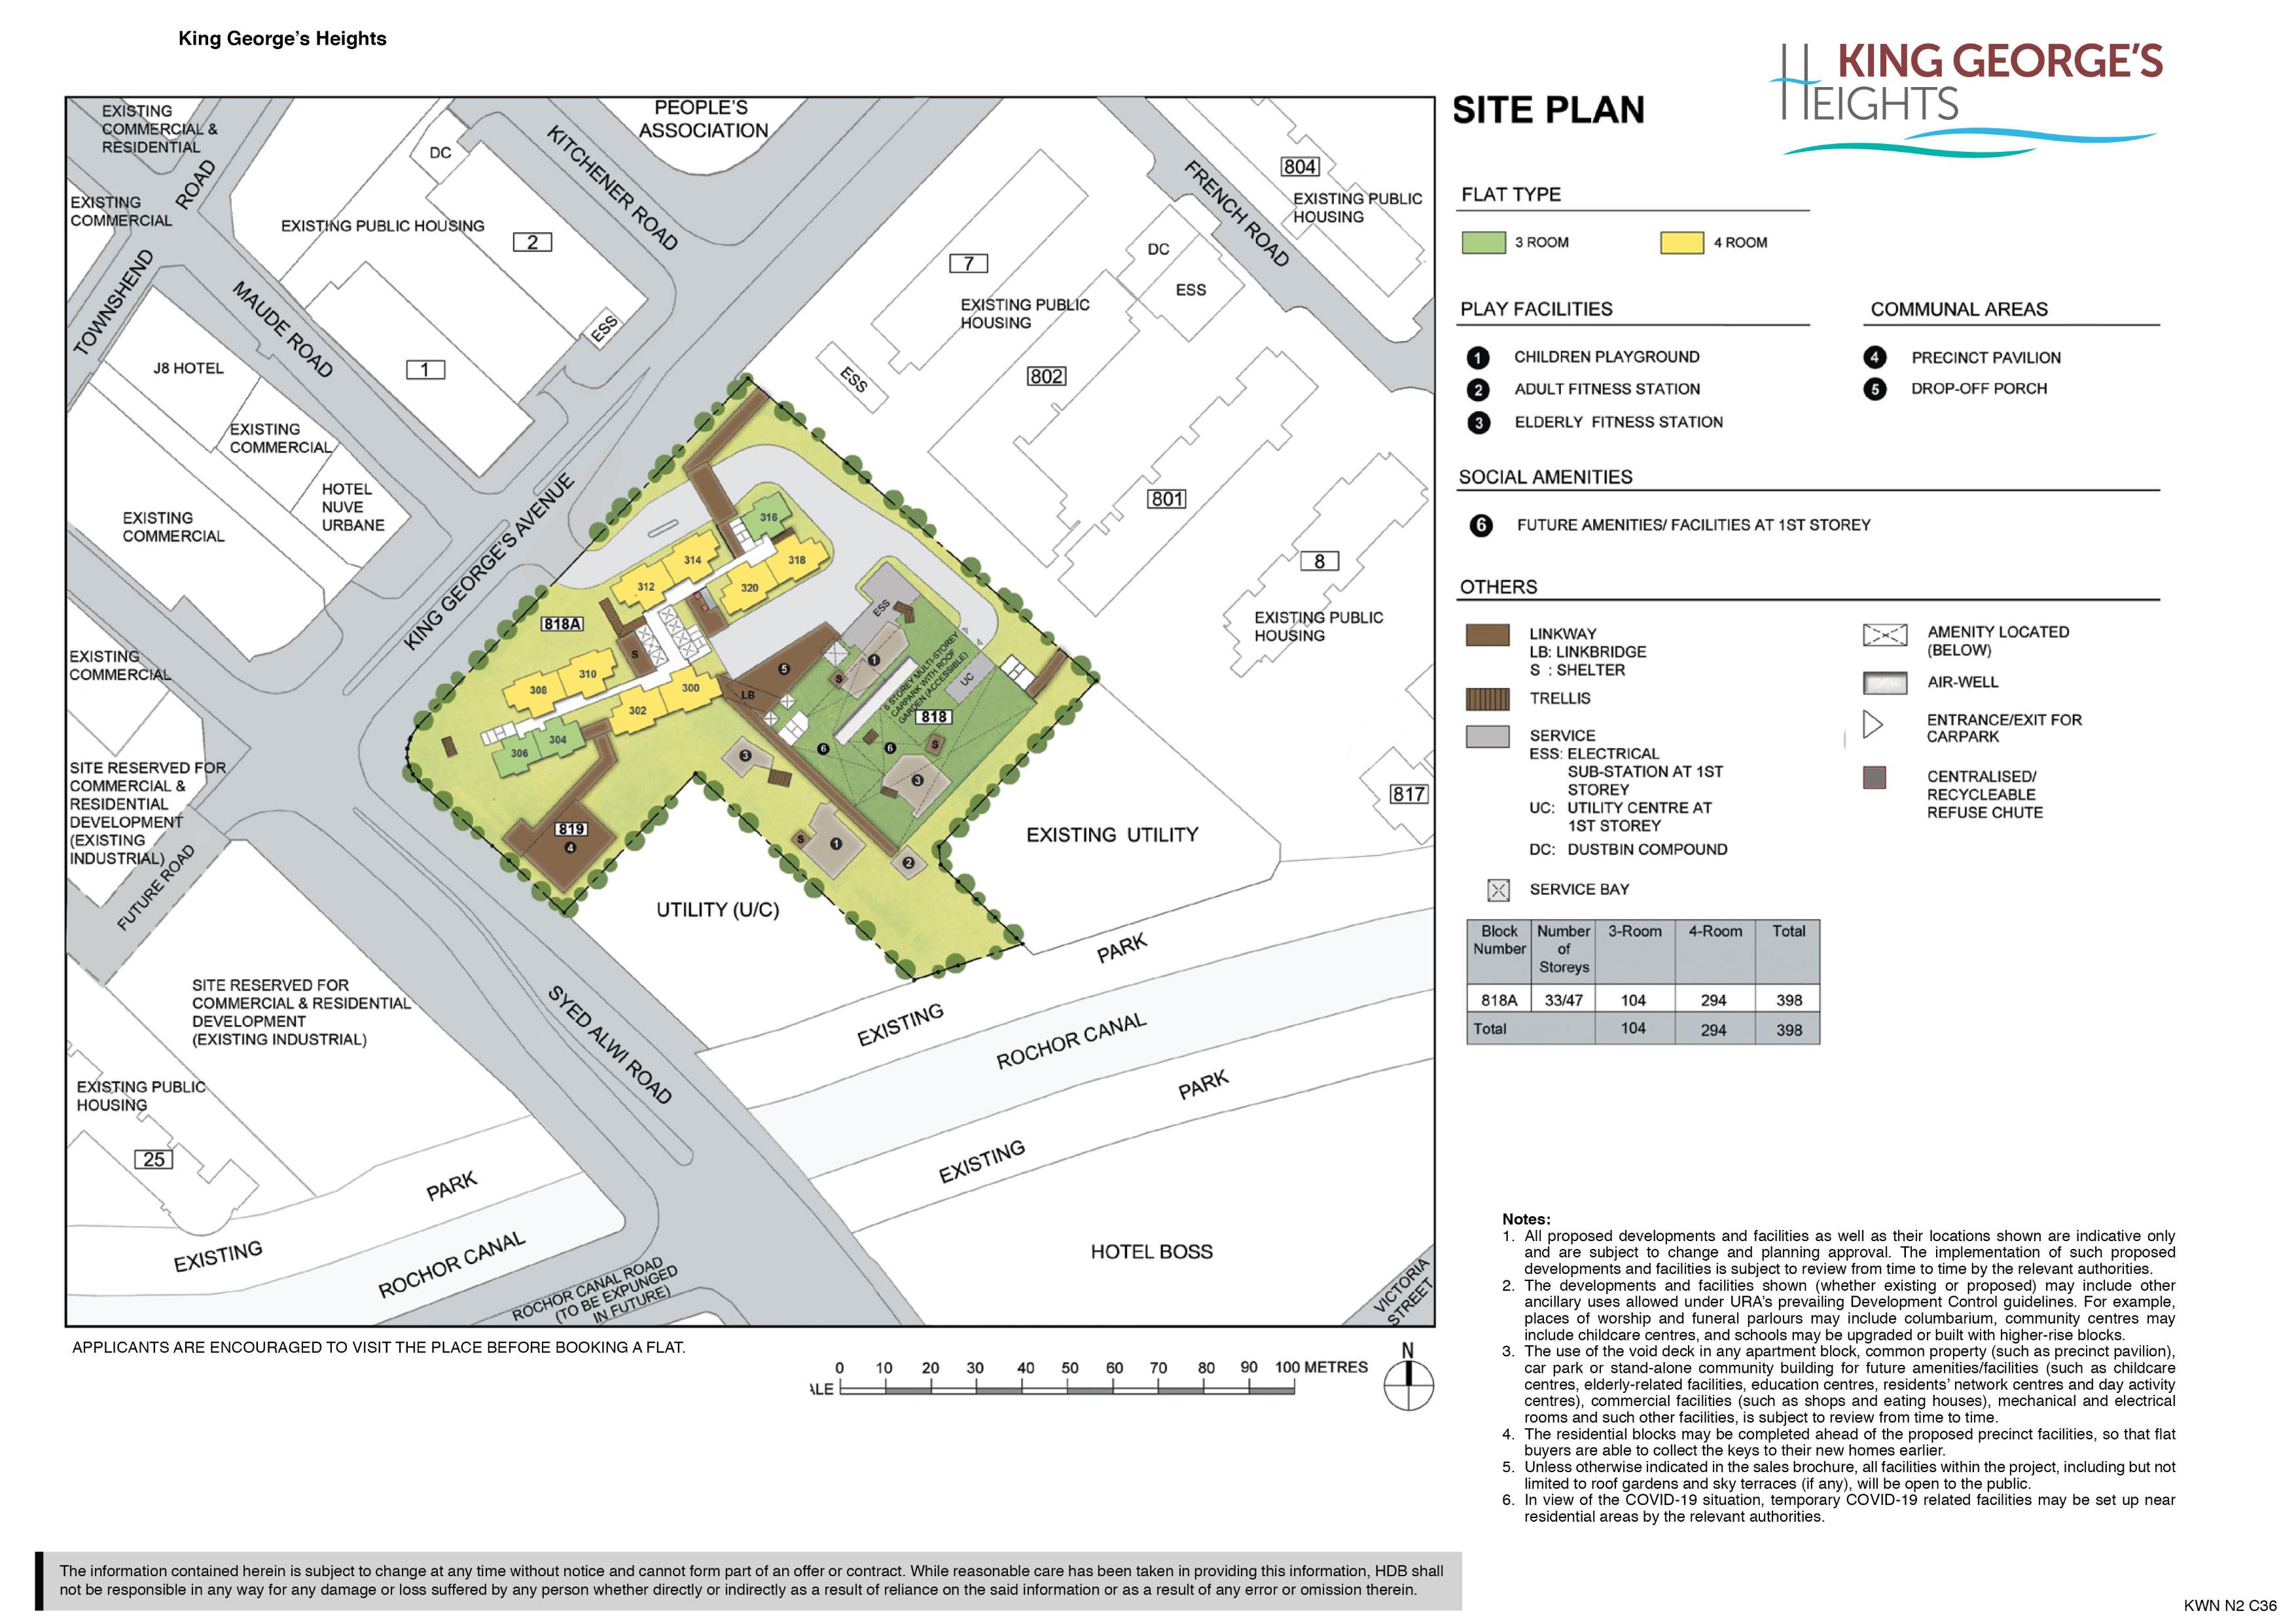 King George's Heights Site Plan